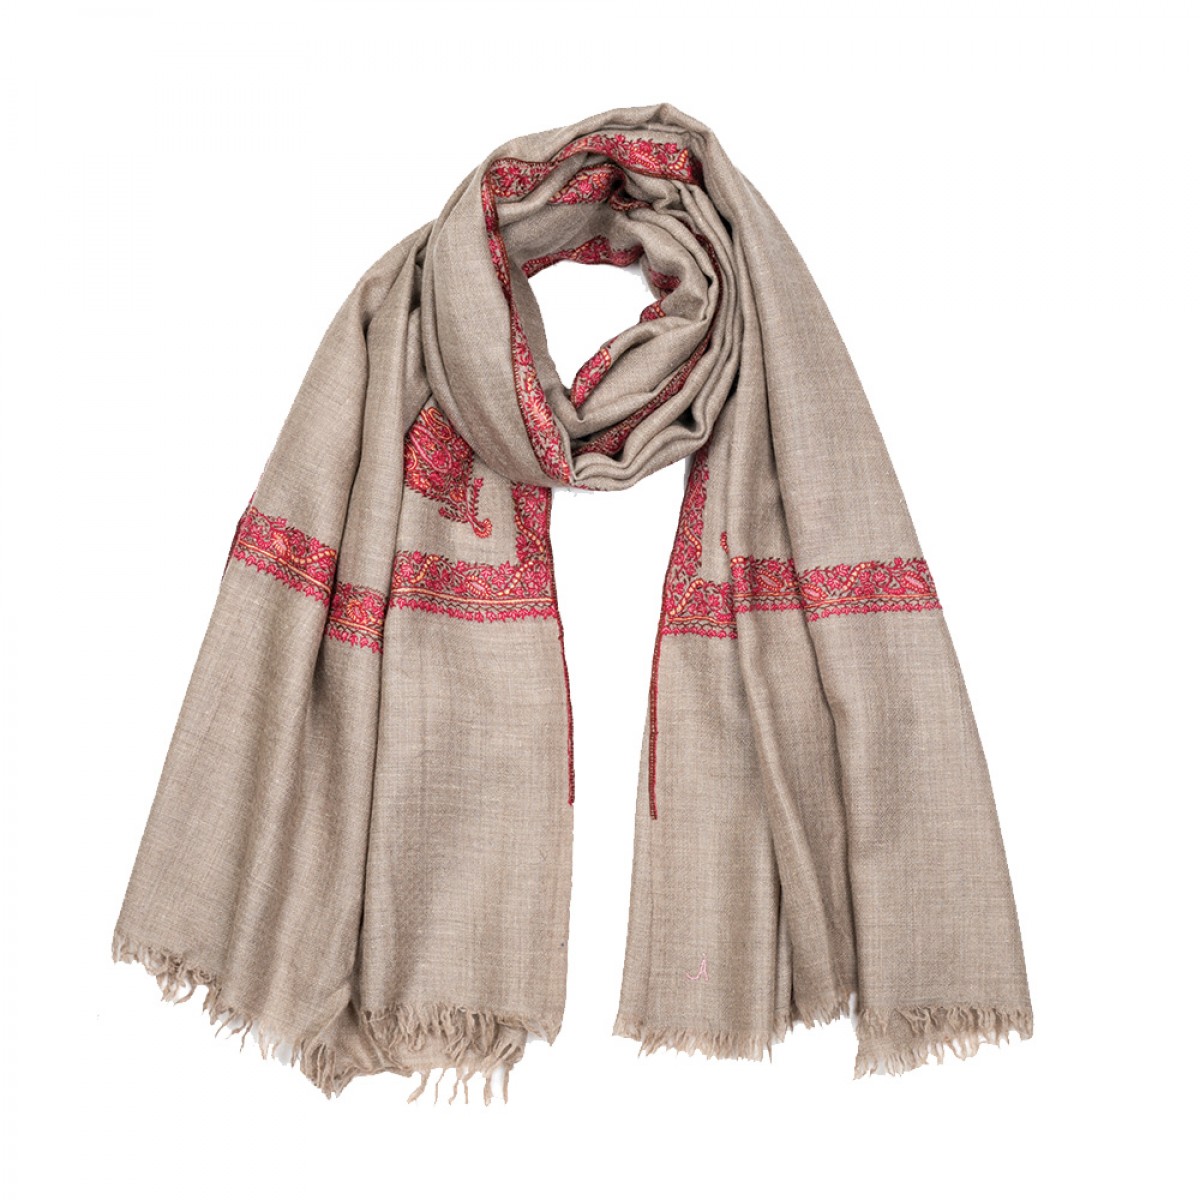 Embroidered Pashmina Stole - Natural & Dark Red